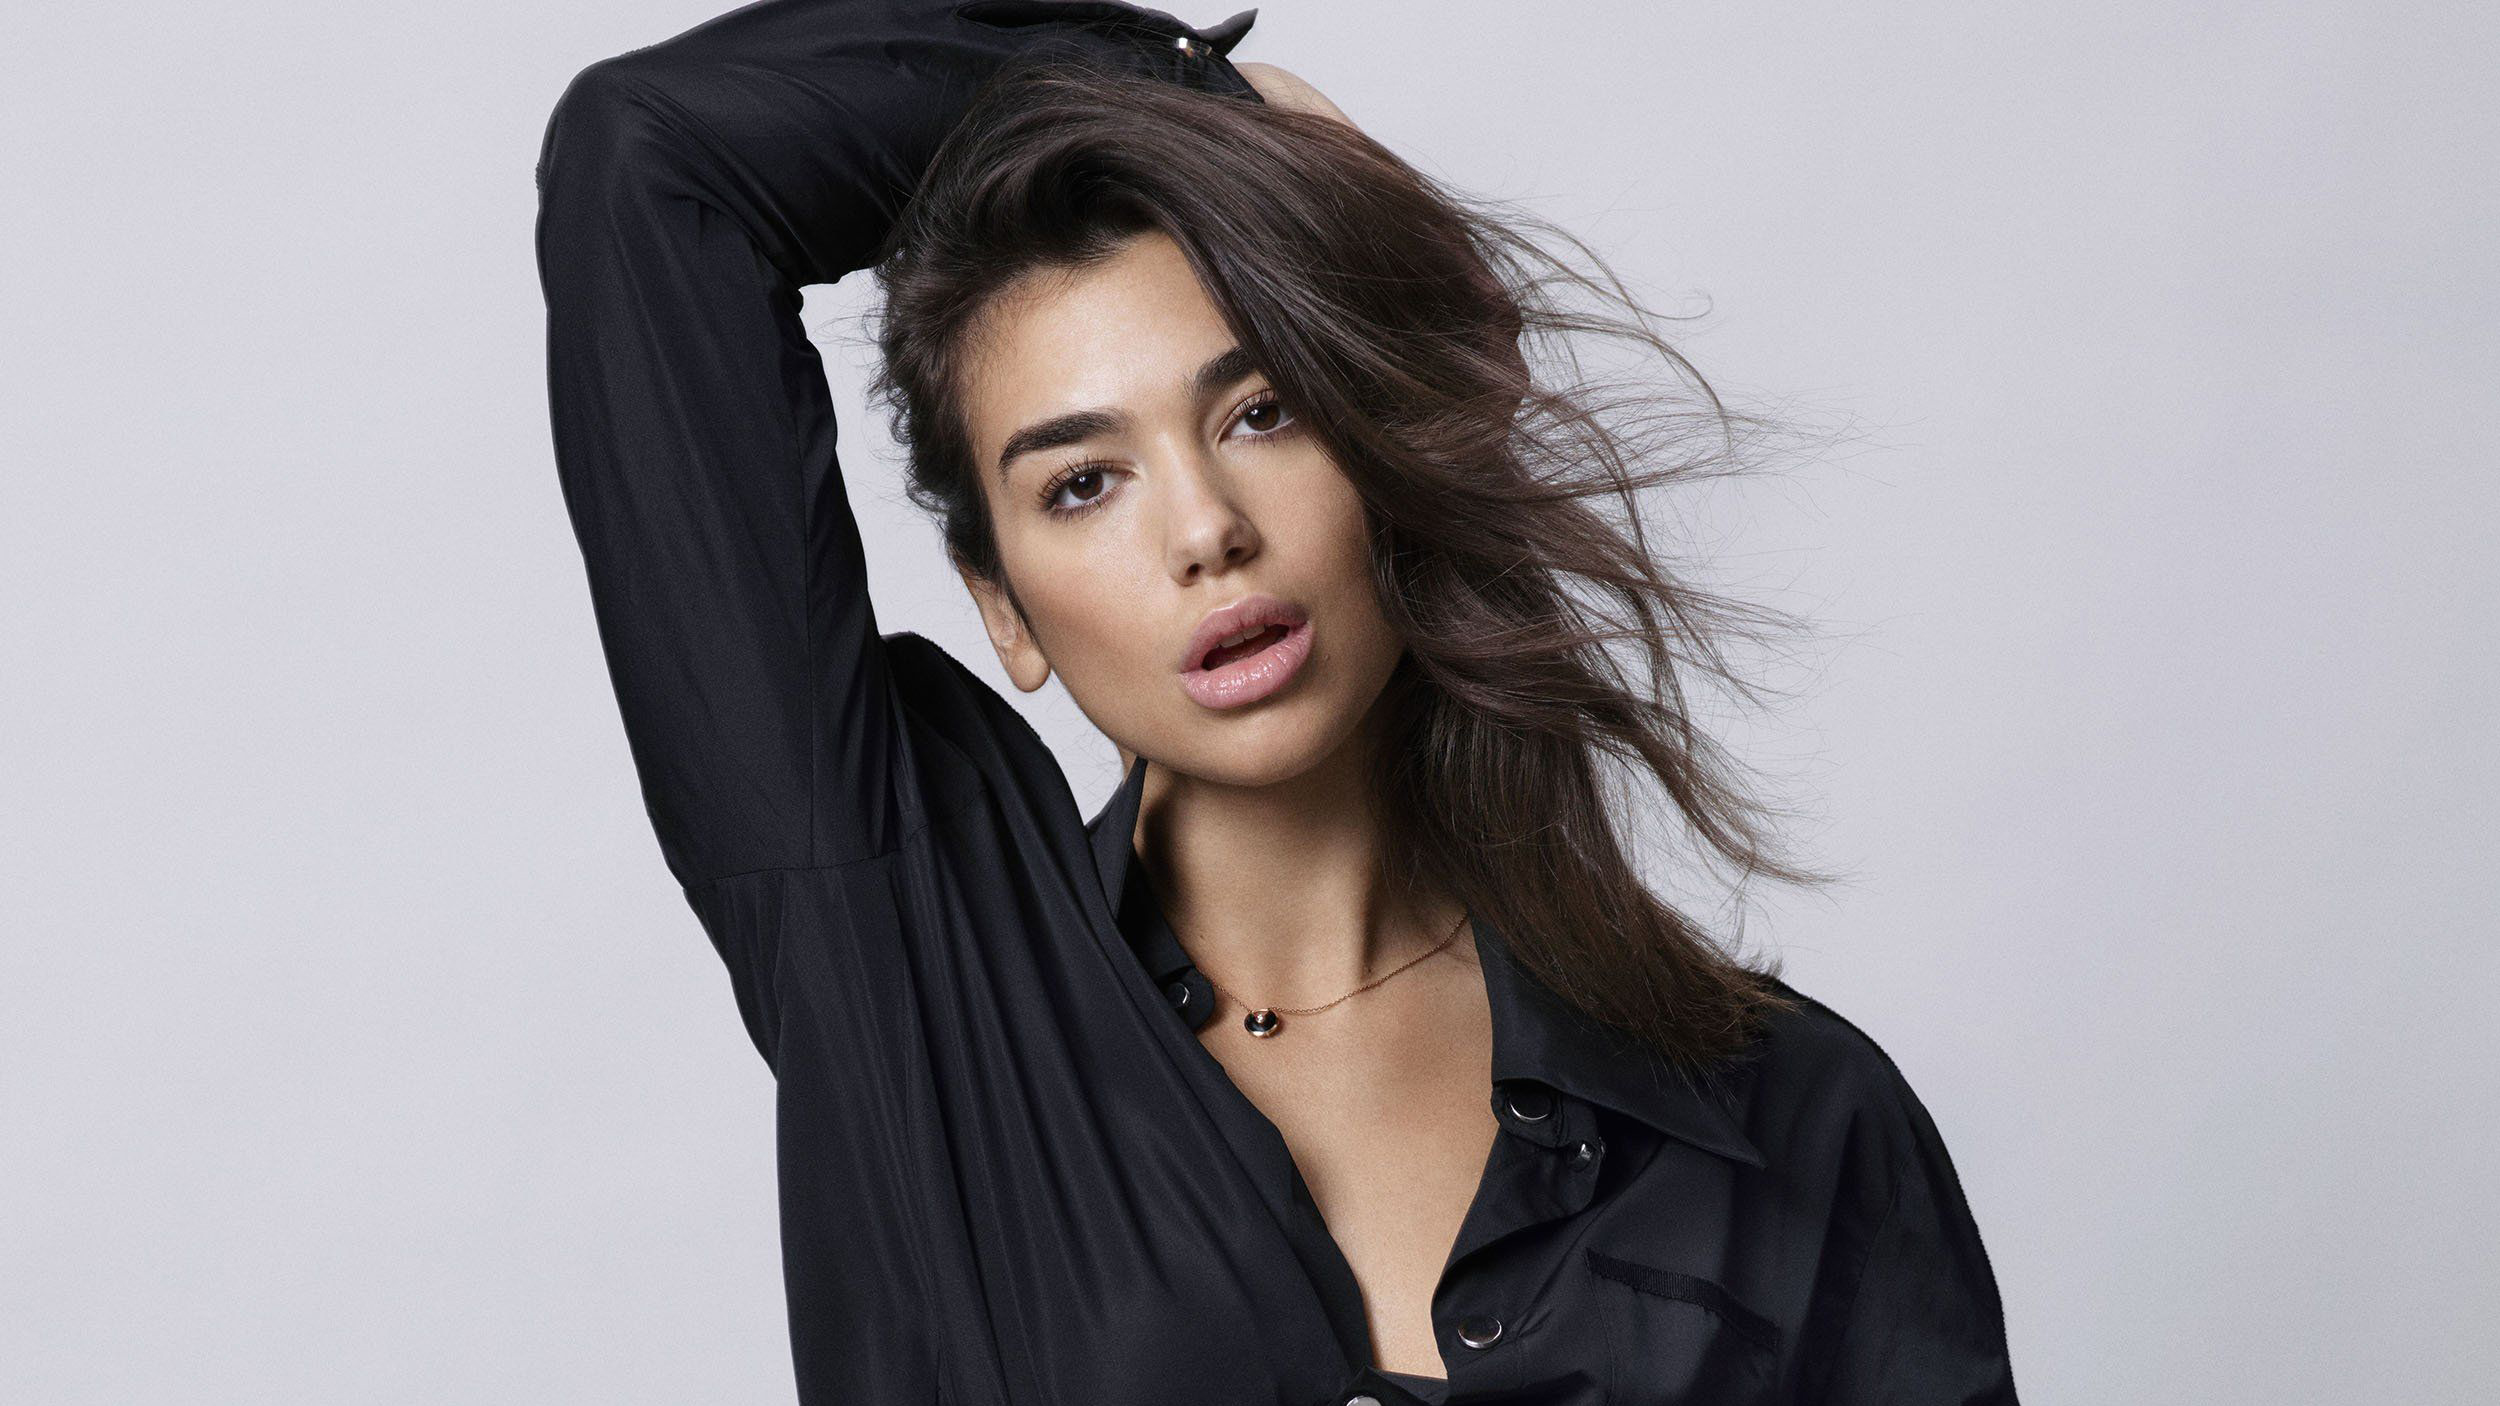 Dua lipa singer hd music k wallpapers images backgrounds photos and pictures